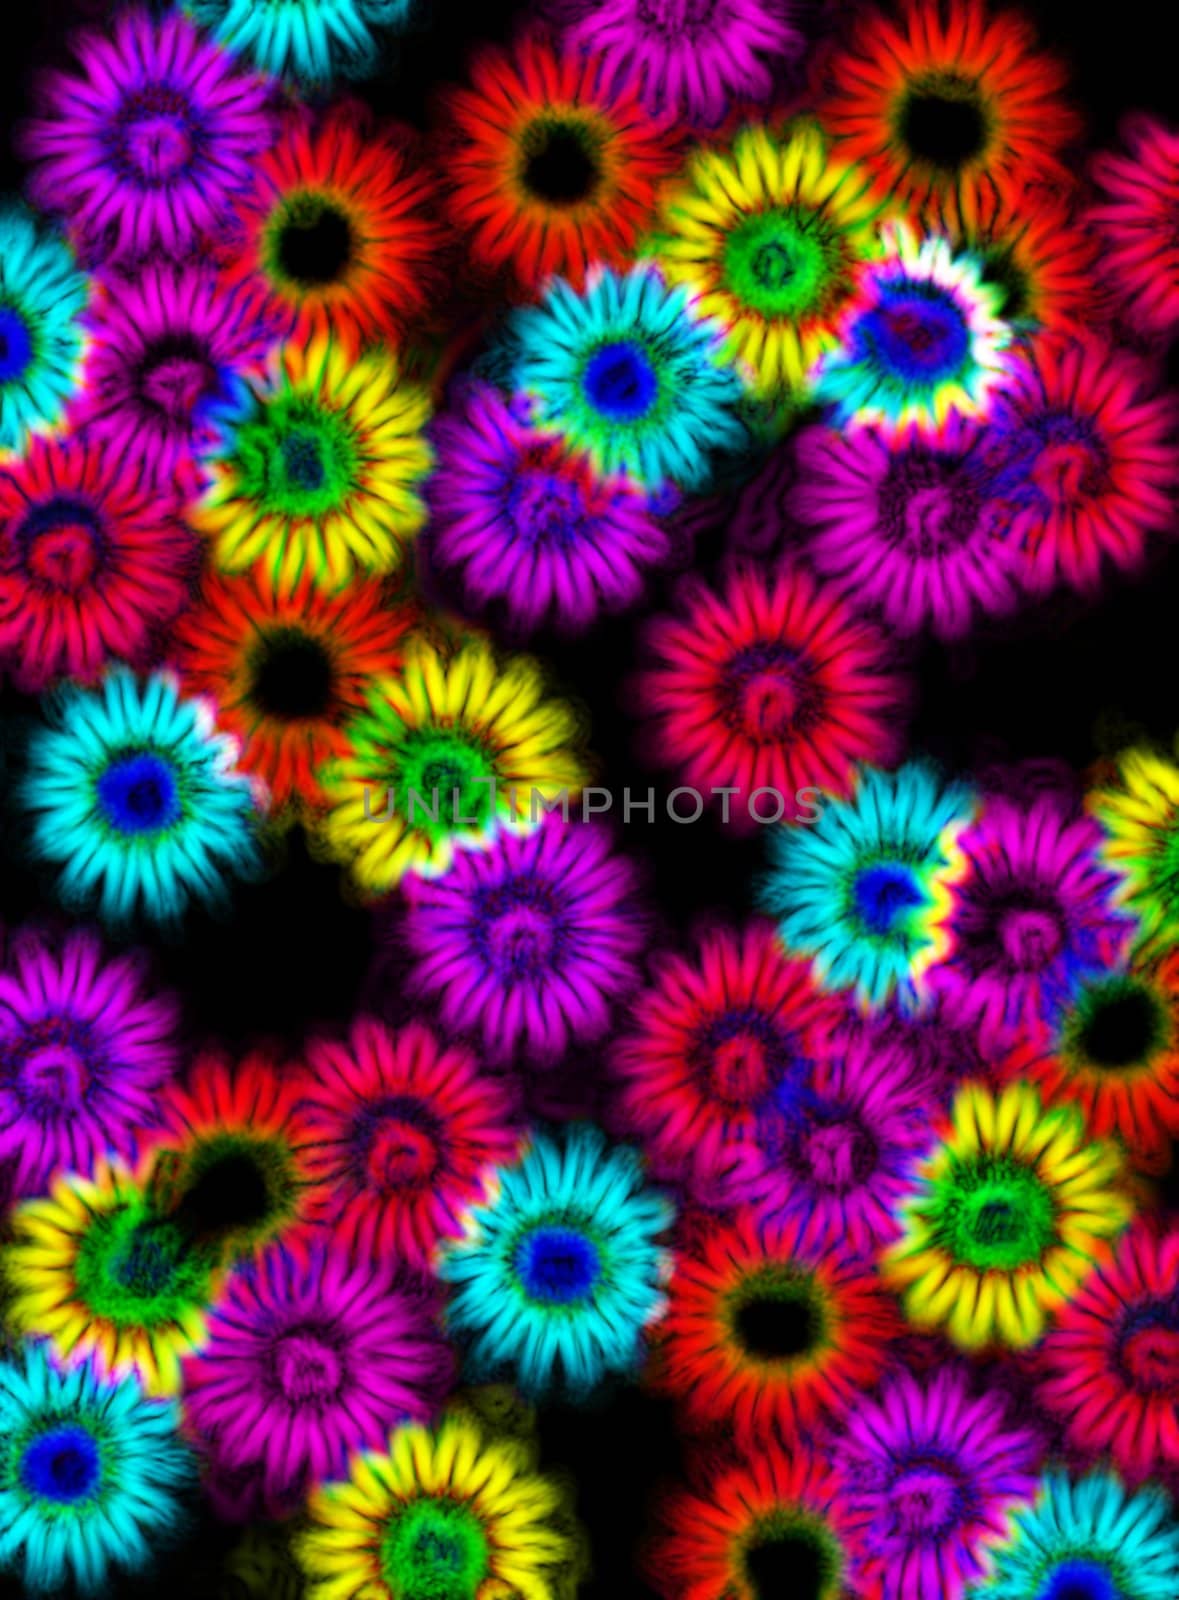 abstracted impressions of flower sahpes in neon colors on black